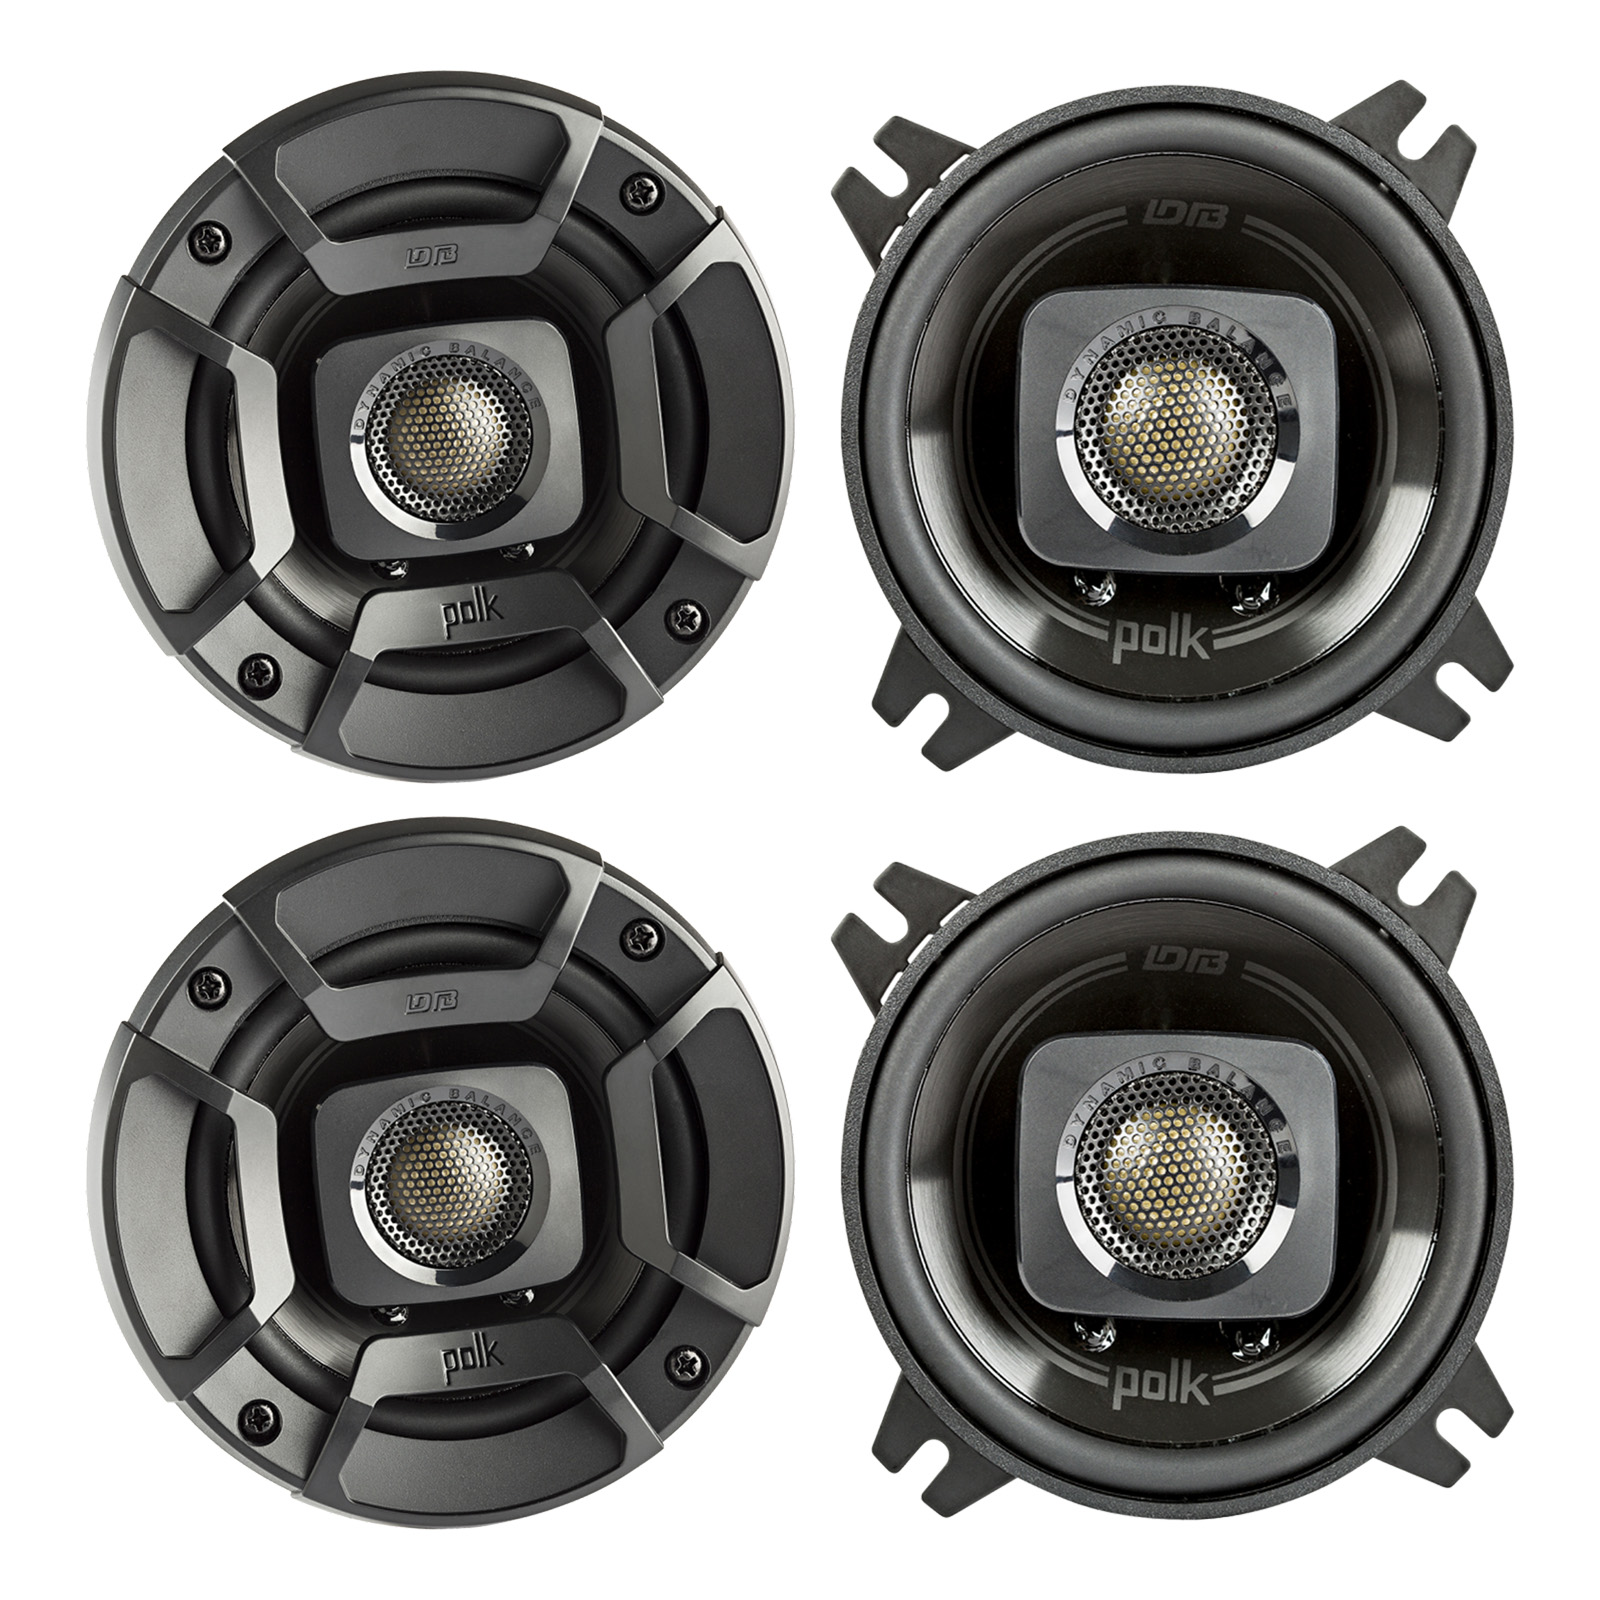 2 Pairs (QTY 4) of Polk Audio DB402 4" 135W Black 2-Way Coaxial Car Speakers + Keychain - image 1 of 2